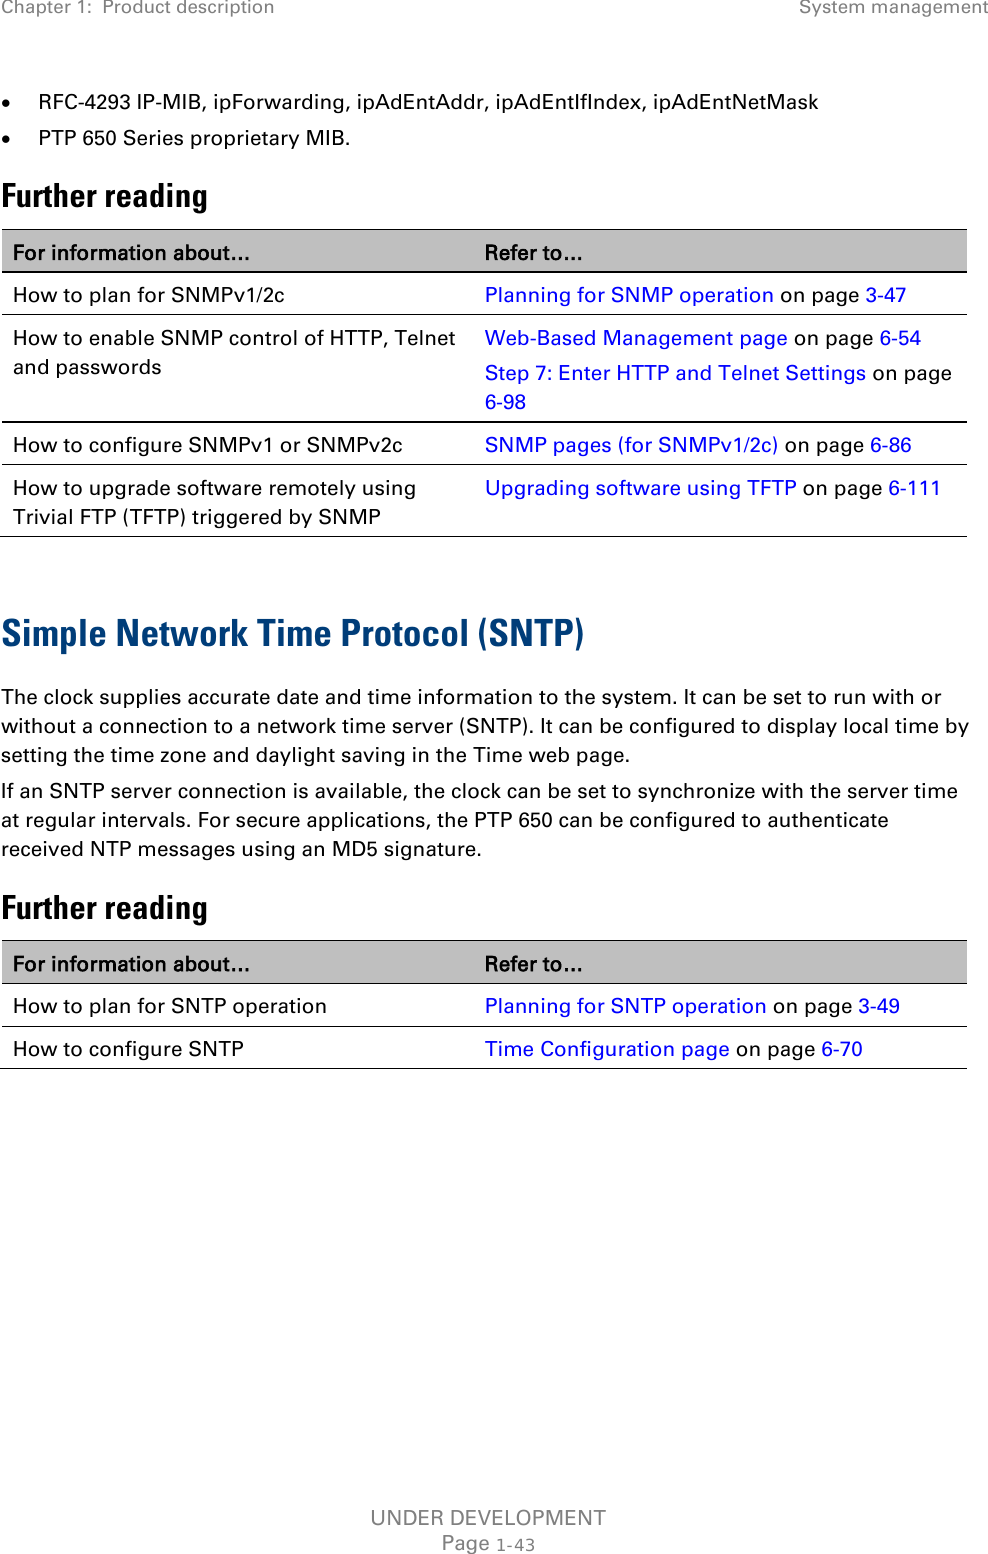 Chapter 1:  Product description System management  • RFC-4293 IP-MIB, ipForwarding, ipAdEntAddr, ipAdEntIfIndex, ipAdEntNetMask • PTP 650 Series proprietary MIB. Further reading For information about… Refer to… How to plan for SNMPv1/2c Planning for SNMP operation on page 3-47 How to enable SNMP control of HTTP, Telnet and passwords Web-Based Management page on page 6-54 Step 7: Enter HTTP and Telnet Settings on page 6-98 How to configure SNMPv1 or SNMPv2c SNMP pages (for SNMPv1/2c) on page 6-86 How to upgrade software remotely using Trivial FTP (TFTP) triggered by SNMP Upgrading software using TFTP on page 6-111  Simple Network Time Protocol (SNTP) The clock supplies accurate date and time information to the system. It can be set to run with or without a connection to a network time server (SNTP). It can be configured to display local time by setting the time zone and daylight saving in the Time web page. If an SNTP server connection is available, the clock can be set to synchronize with the server time at regular intervals. For secure applications, the PTP 650 can be configured to authenticate received NTP messages using an MD5 signature. Further reading For information about… Refer to… How to plan for SNTP operation Planning for SNTP operation on page 3-49 How to configure SNTP Time Configuration page on page 6-70    UNDER DEVELOPMENT Page 1-43 